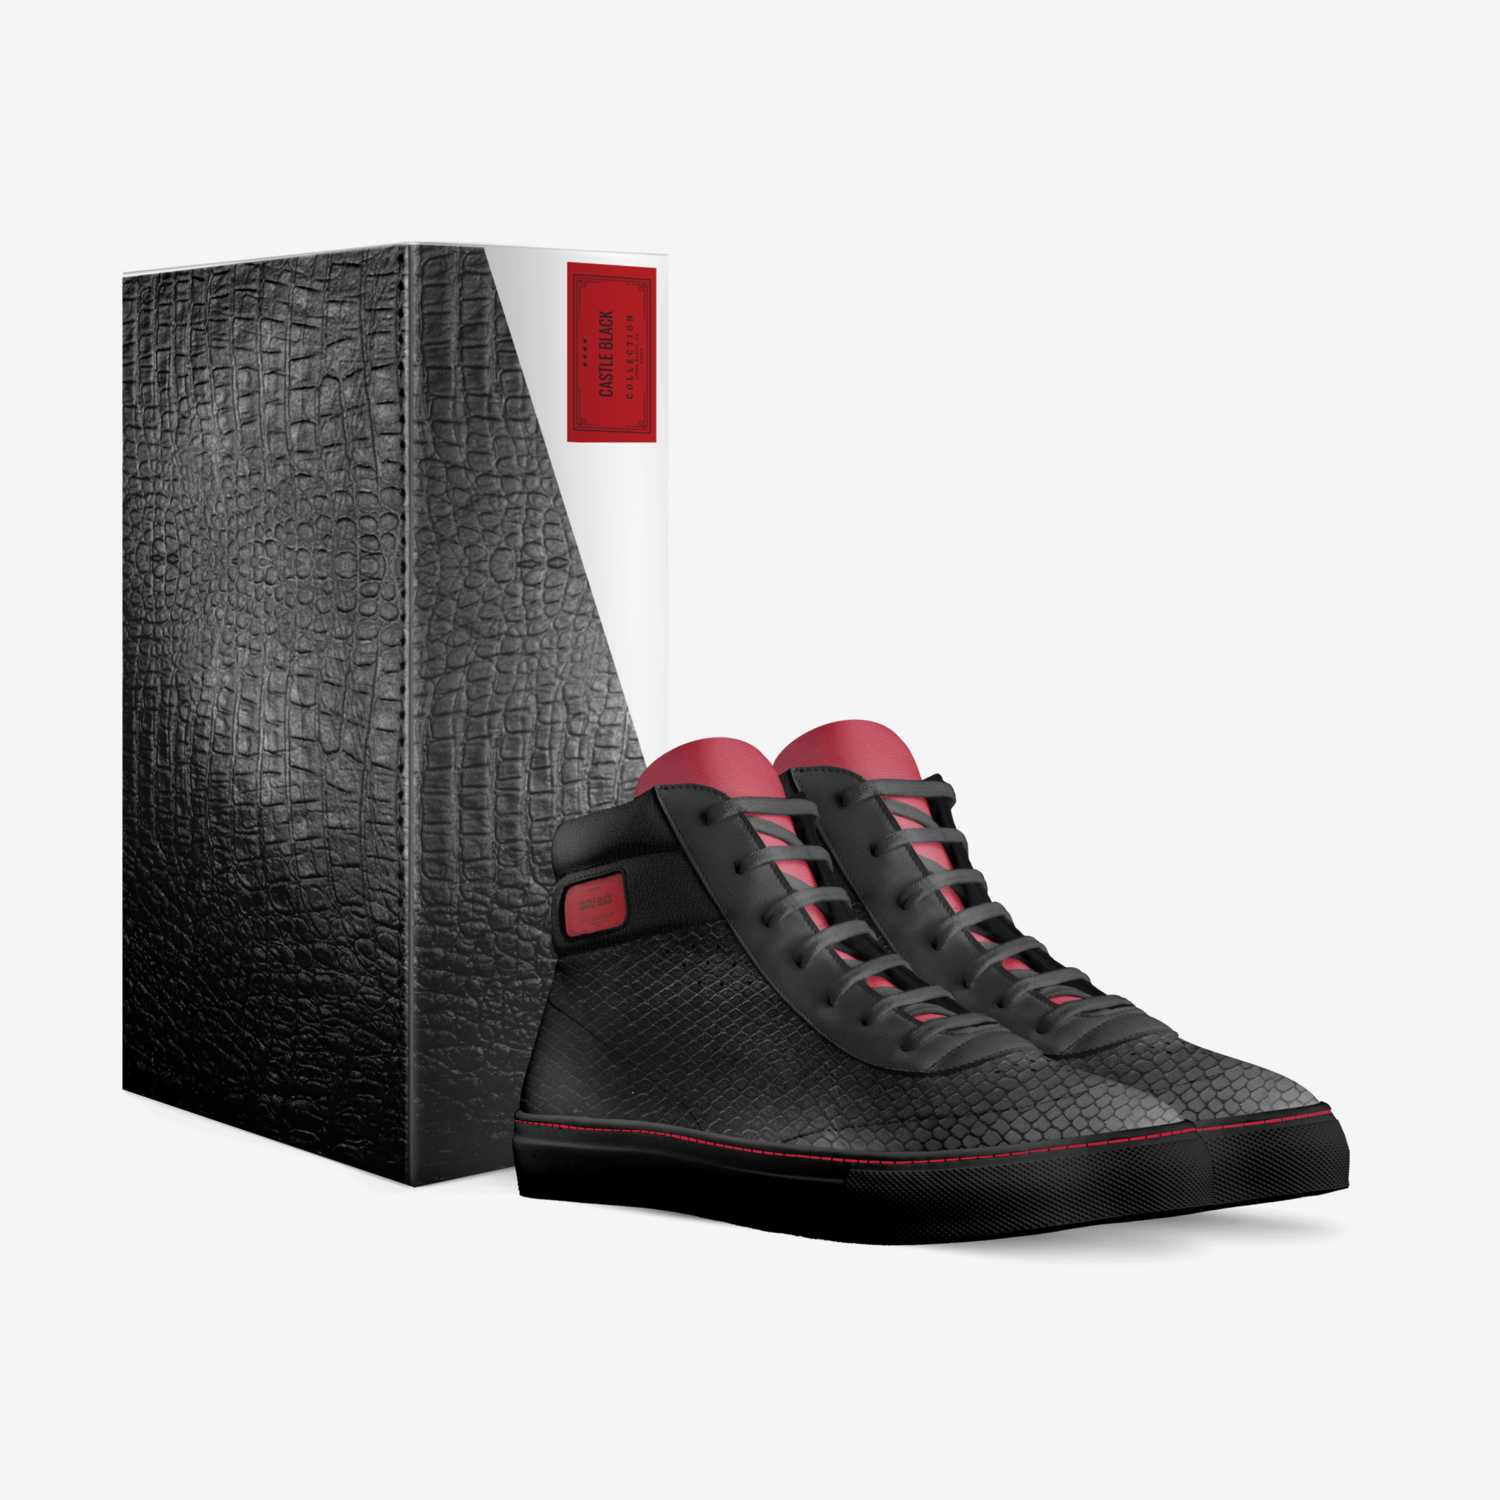 Castle Black custom made in Italy shoes by Desjuan Mays | Box view